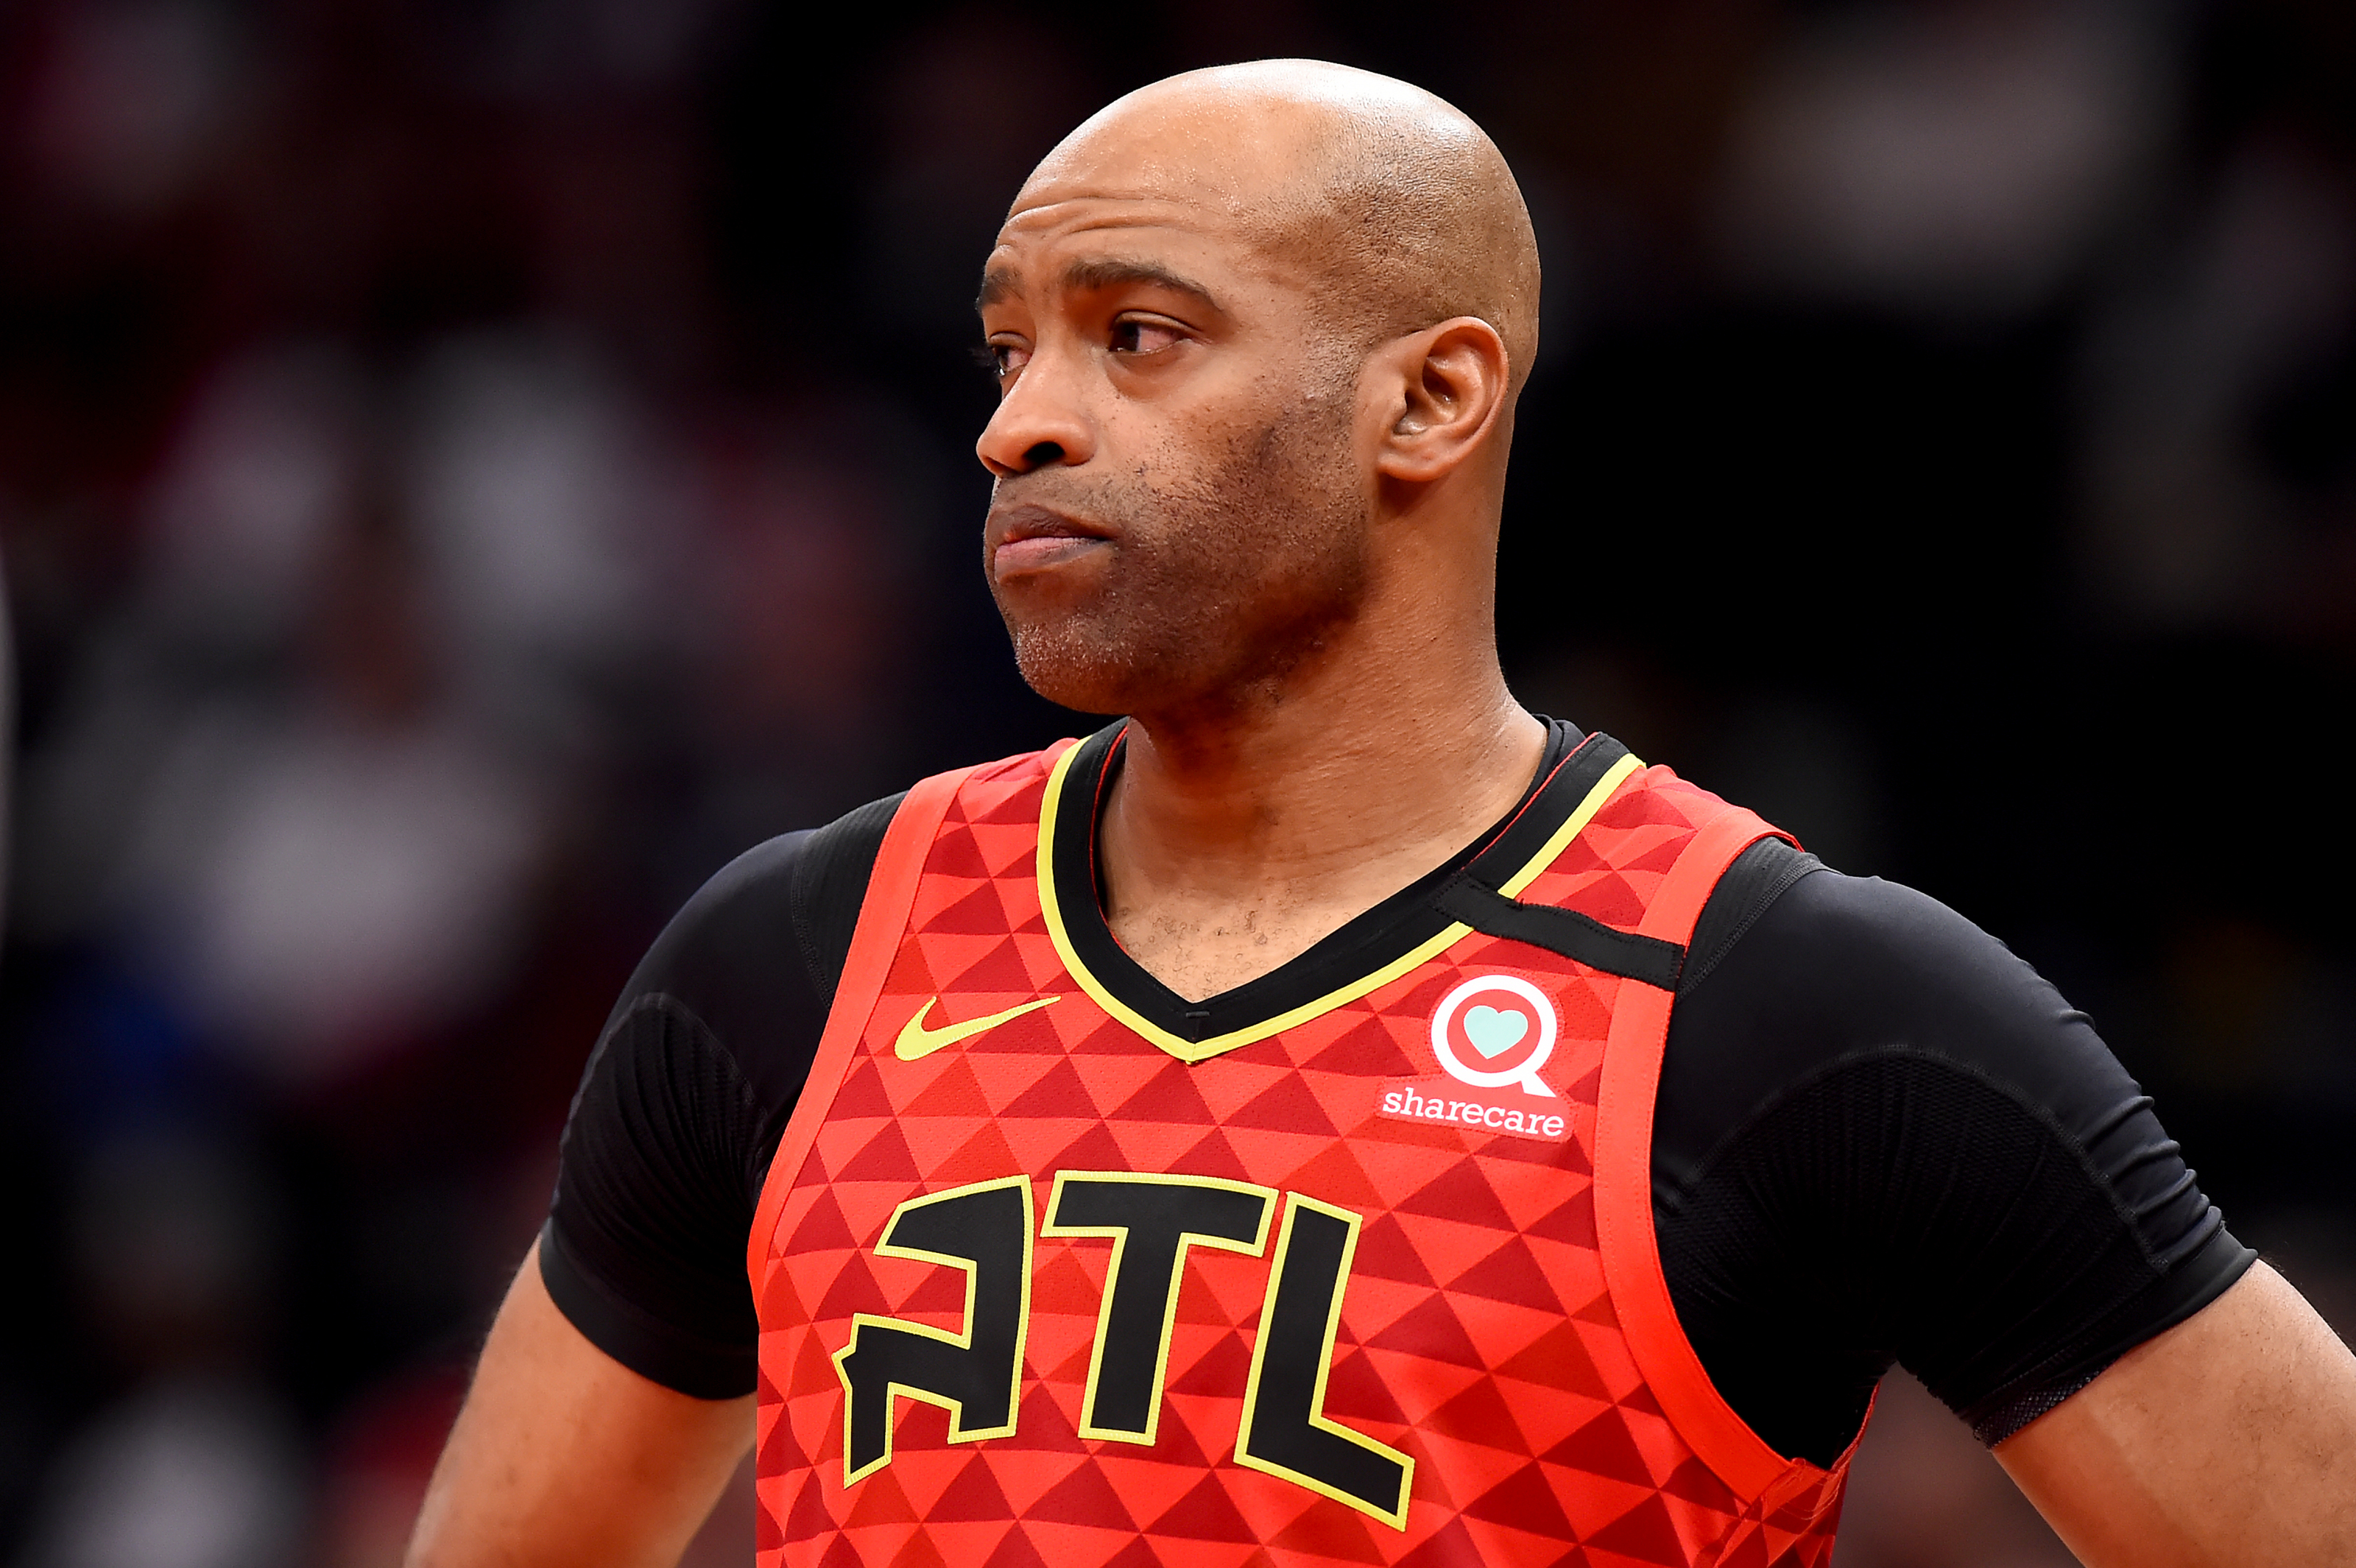 By The Numbers: Vince Carter's career with the Toronto Raptors